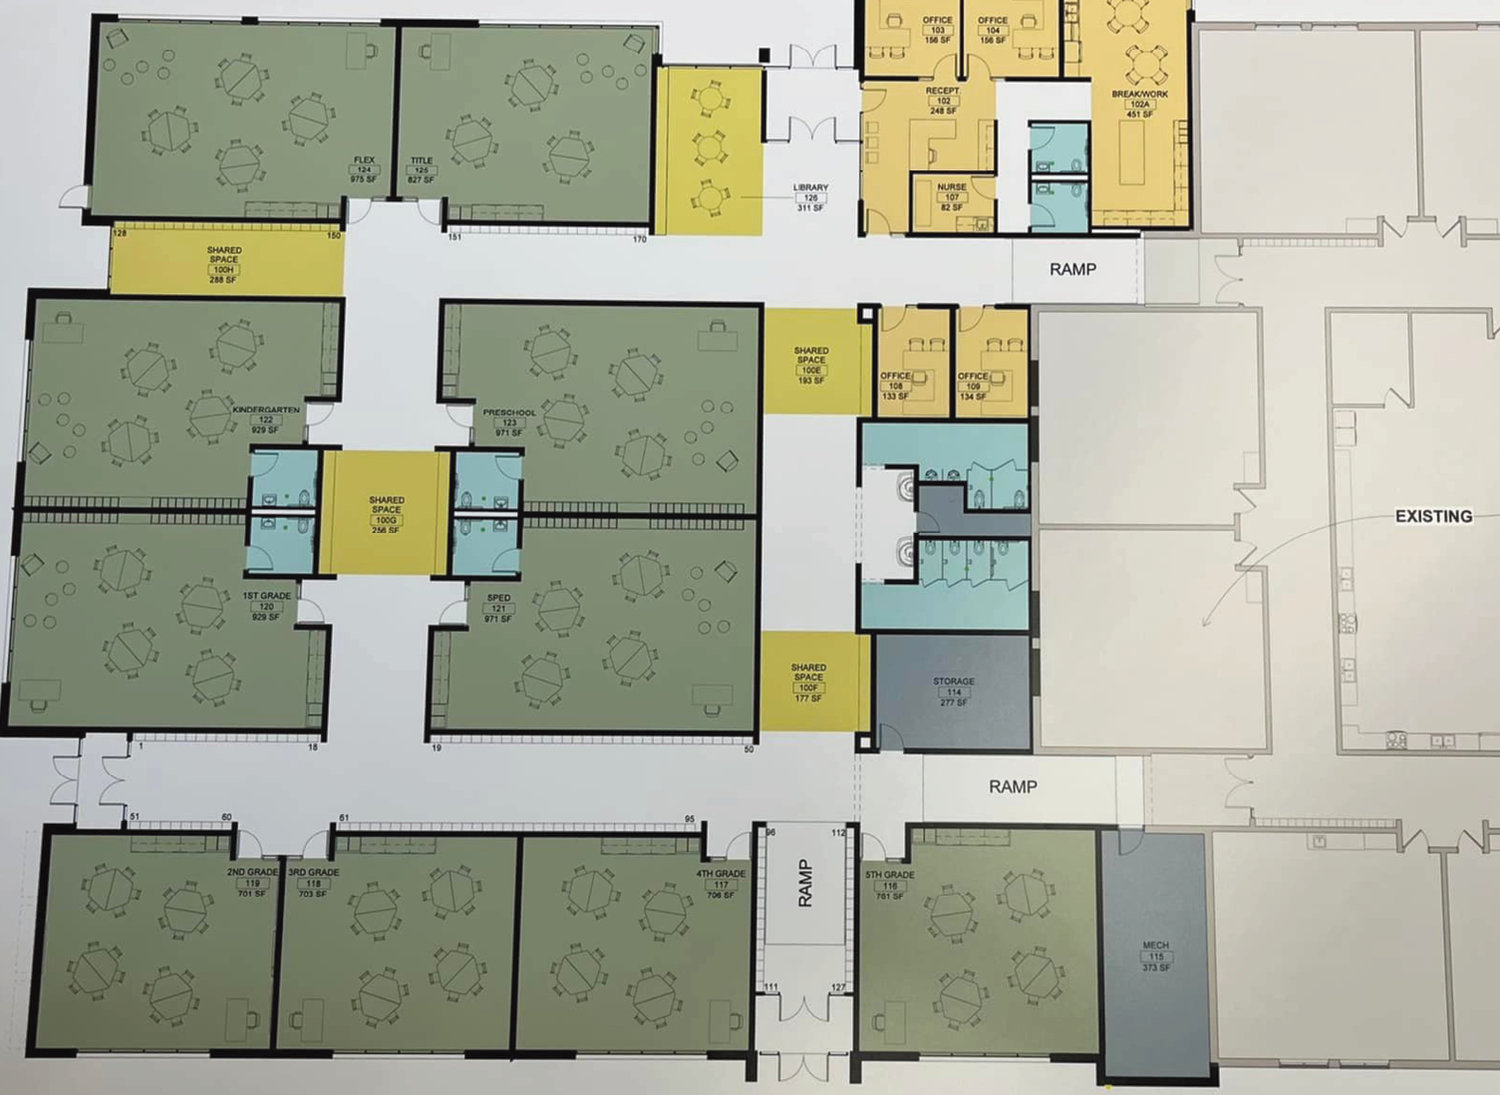 The floorplan of the proposed elementary includes ten classrooms as well as office space, bathroom and a library.